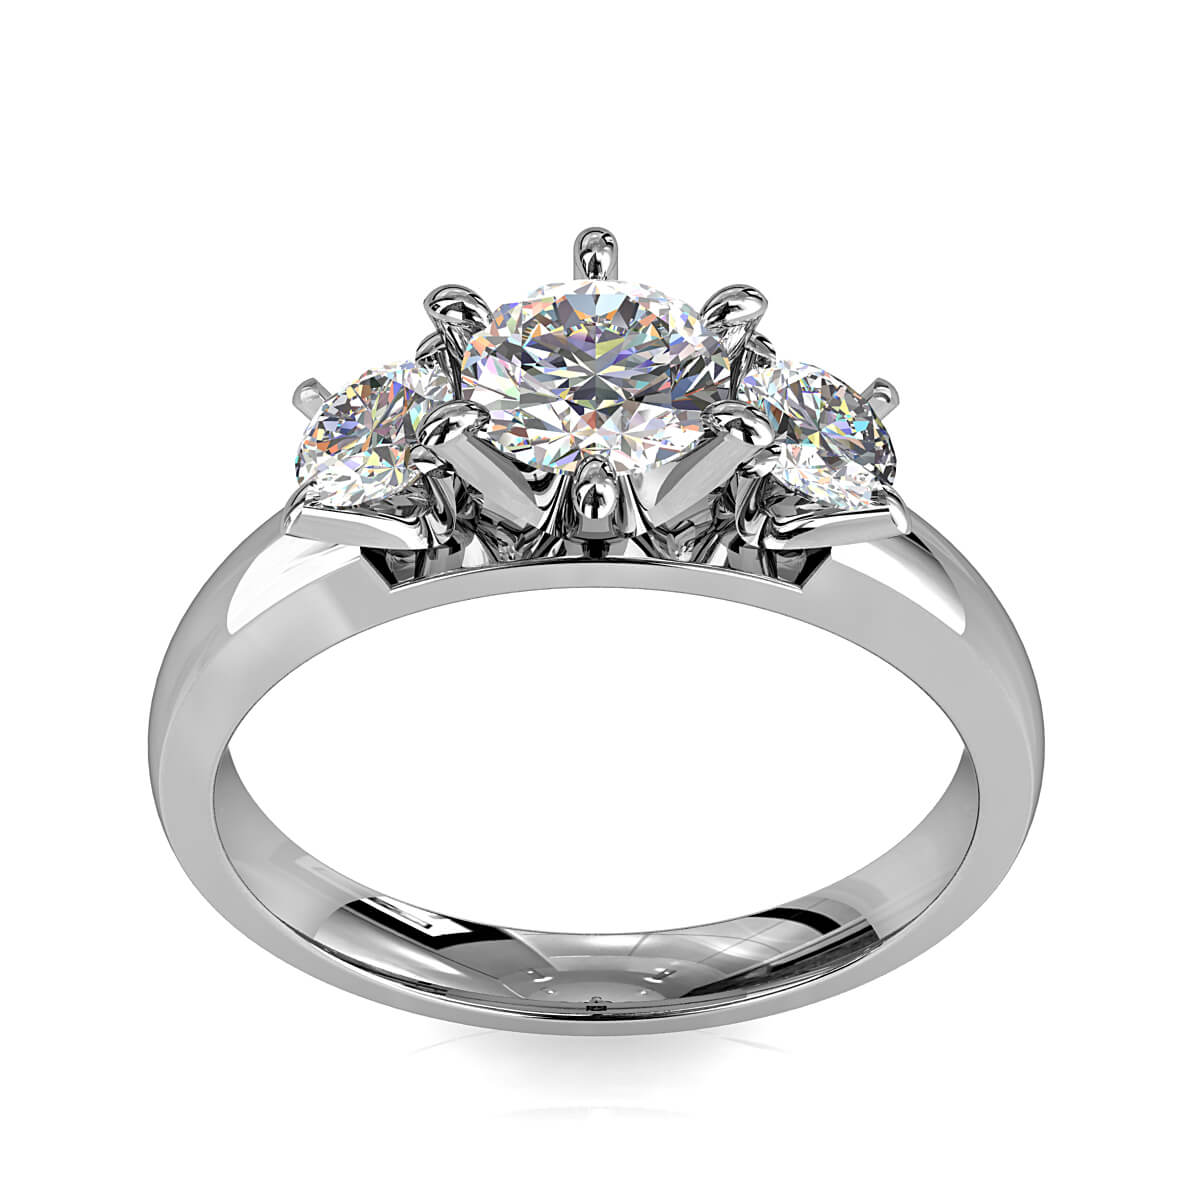 Round Brilliant Cut Diamond Trilogy Engagement Ring, Centre 6 Claw Set with 4 Claw Set Pear Side Stones with a Classic Crown Setting.